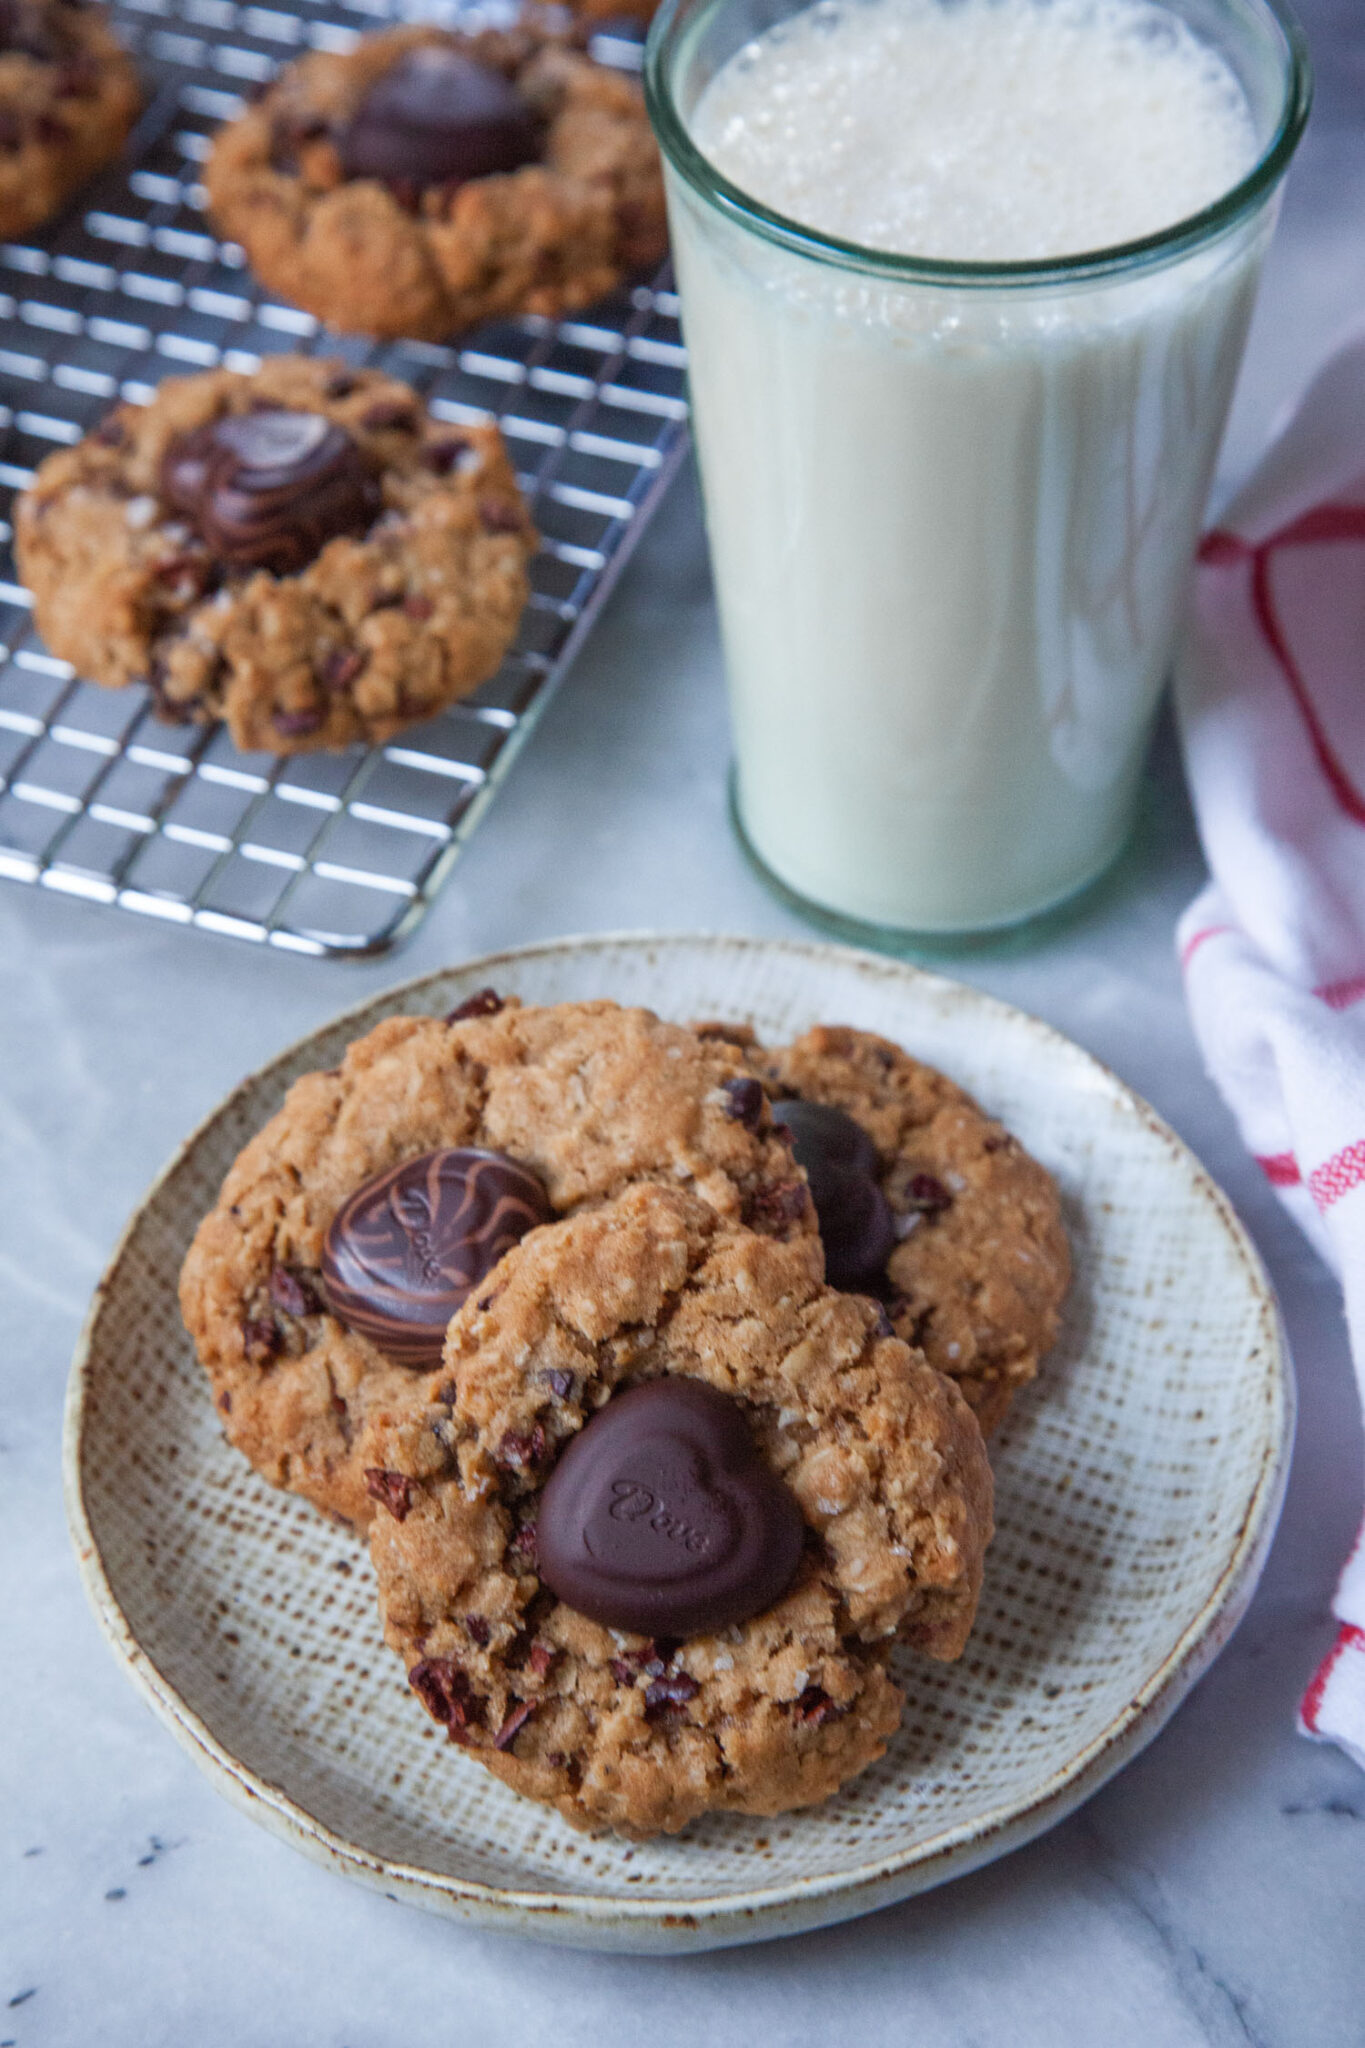 Three oatmeal dried strawberry cookies with a chocolate heart on a plate. There is a glass of milk and more cookies on a wire cooling rack behind the plate.